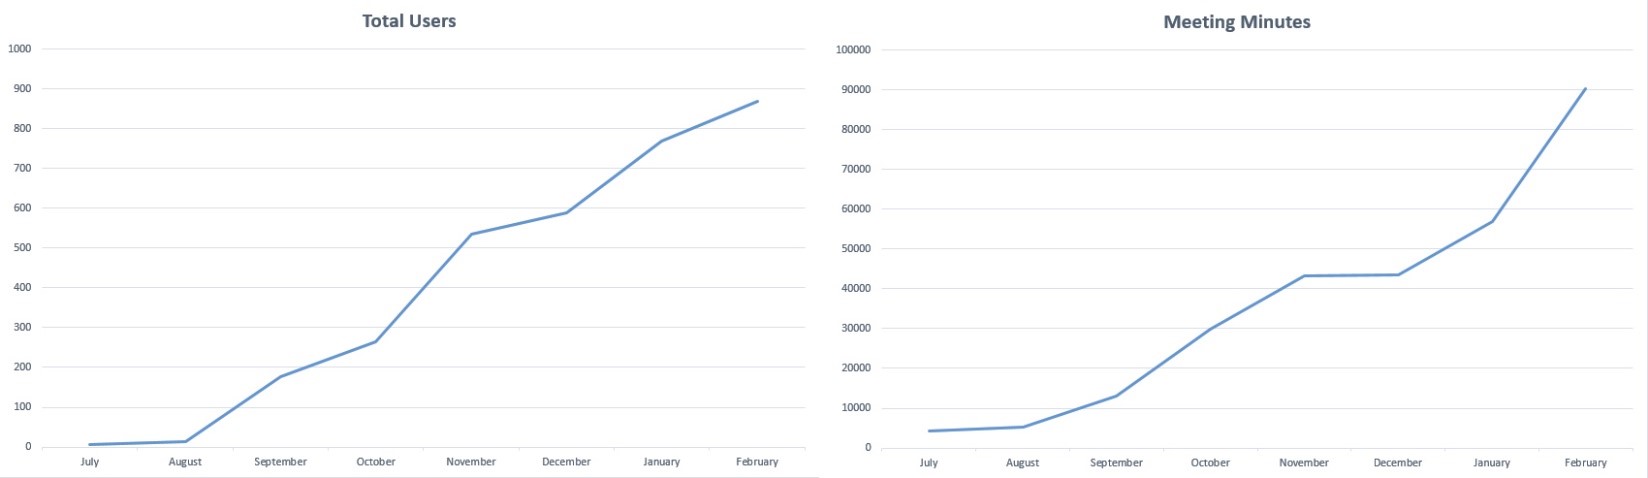 Graph showing total users from July to February, and meeting minutes from July to February. Both charts show a steady incline.